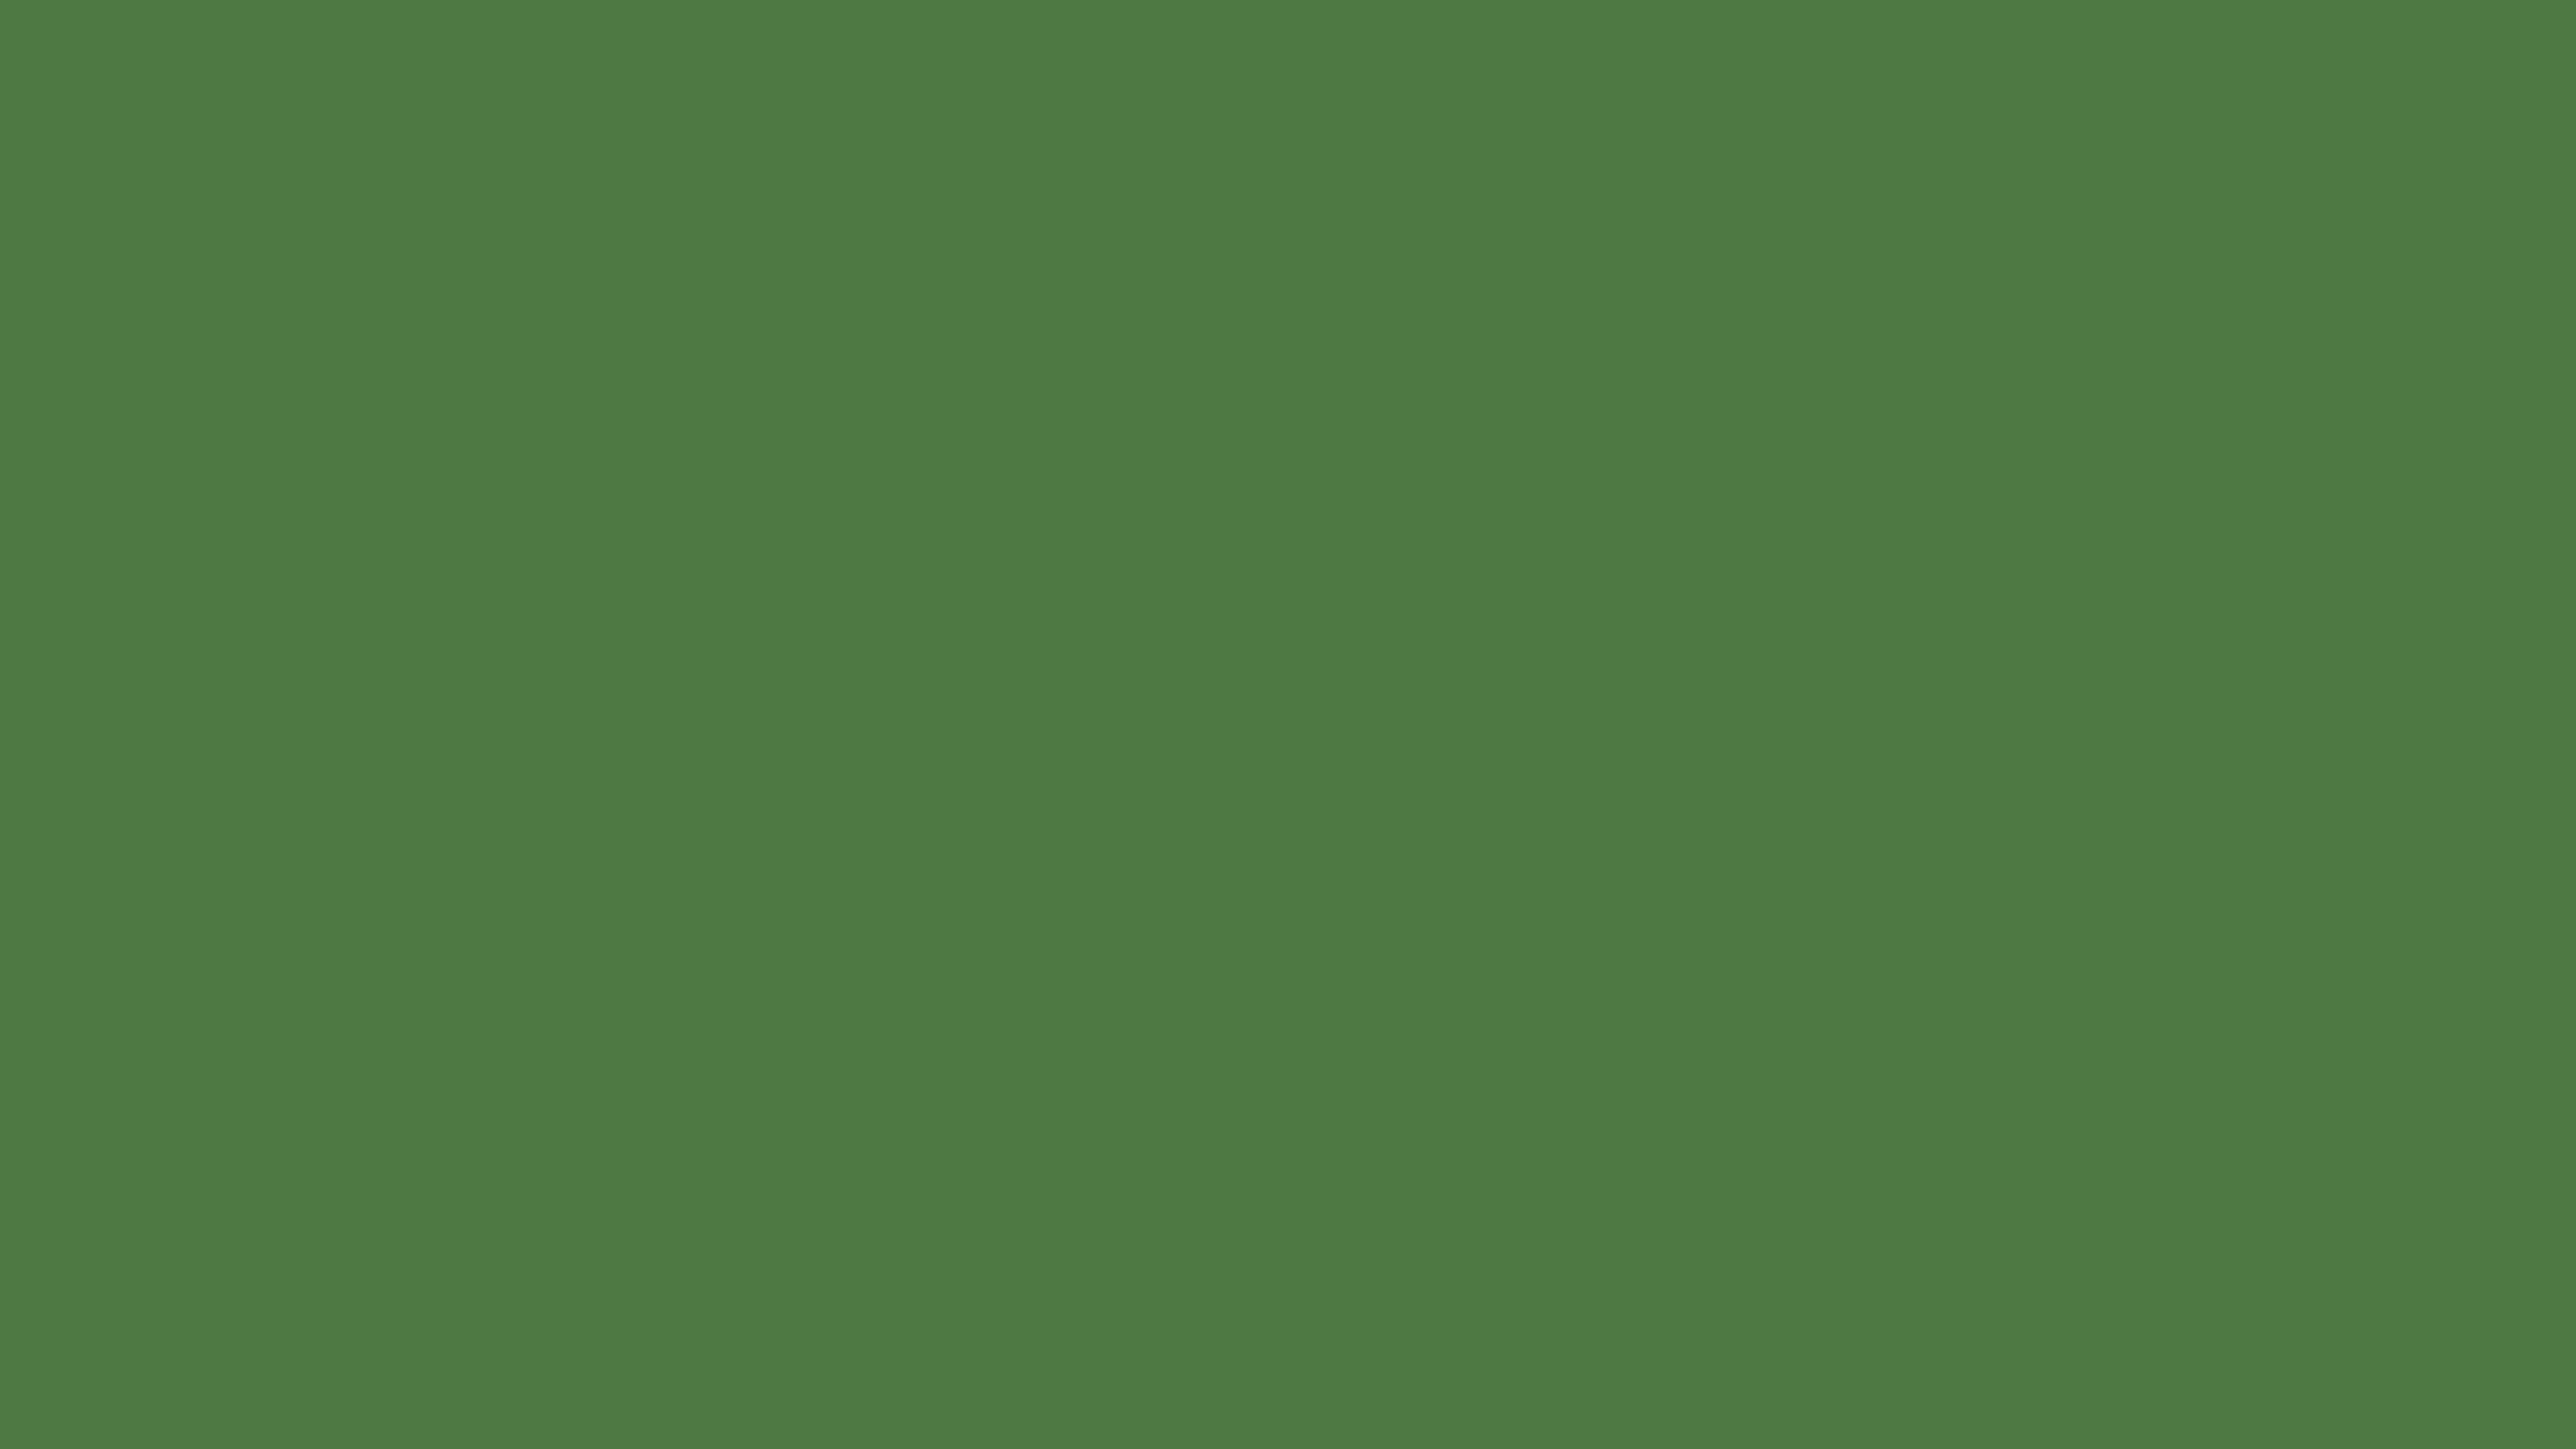 7680x4320 Fern Green Solid Color Background